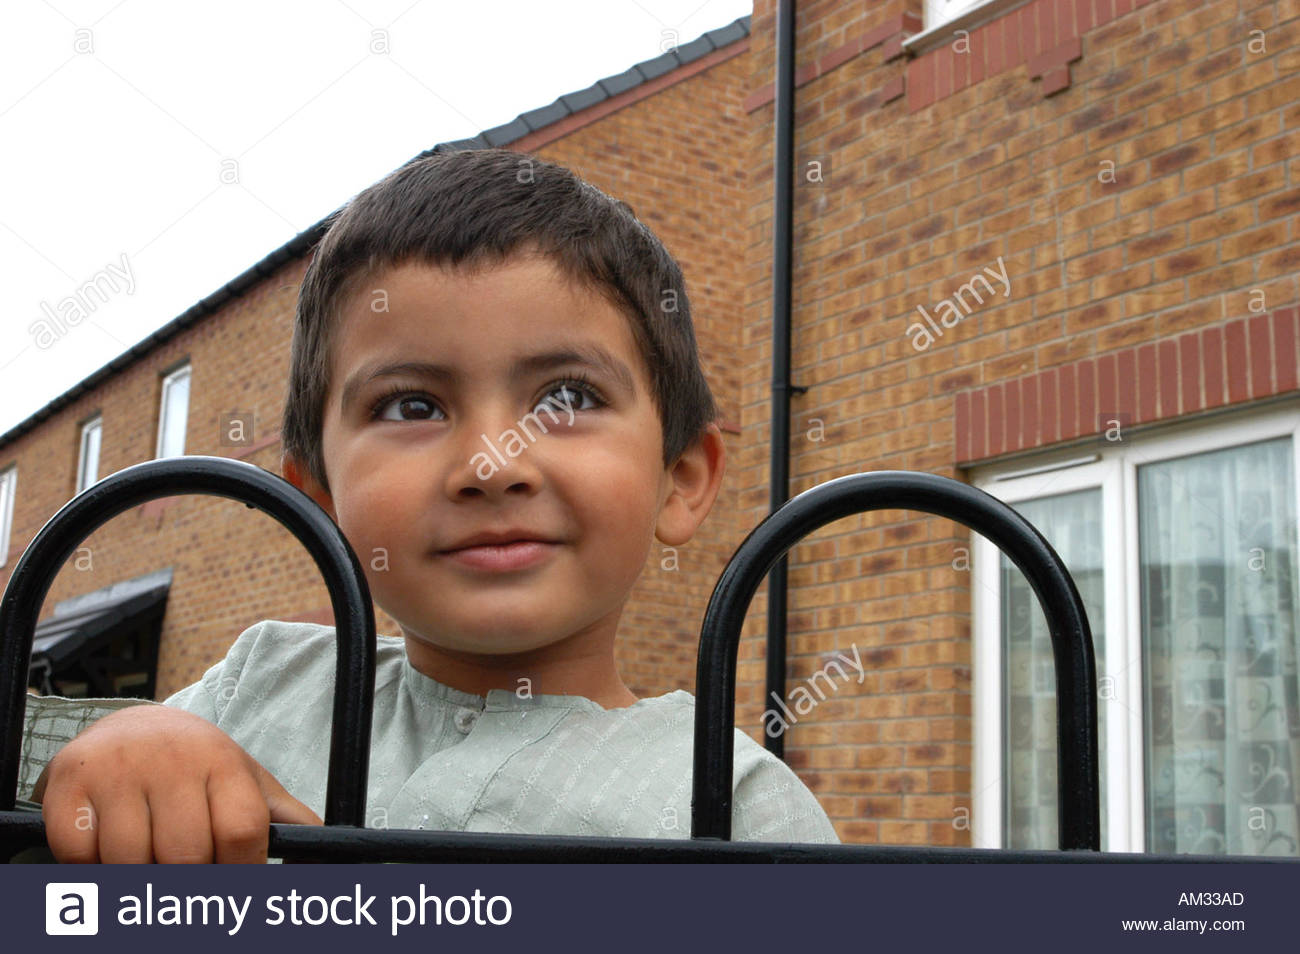 Download preview image - small-boy-playing-outside-his-housing-association-home-halifax-yorkshire-AM33AD